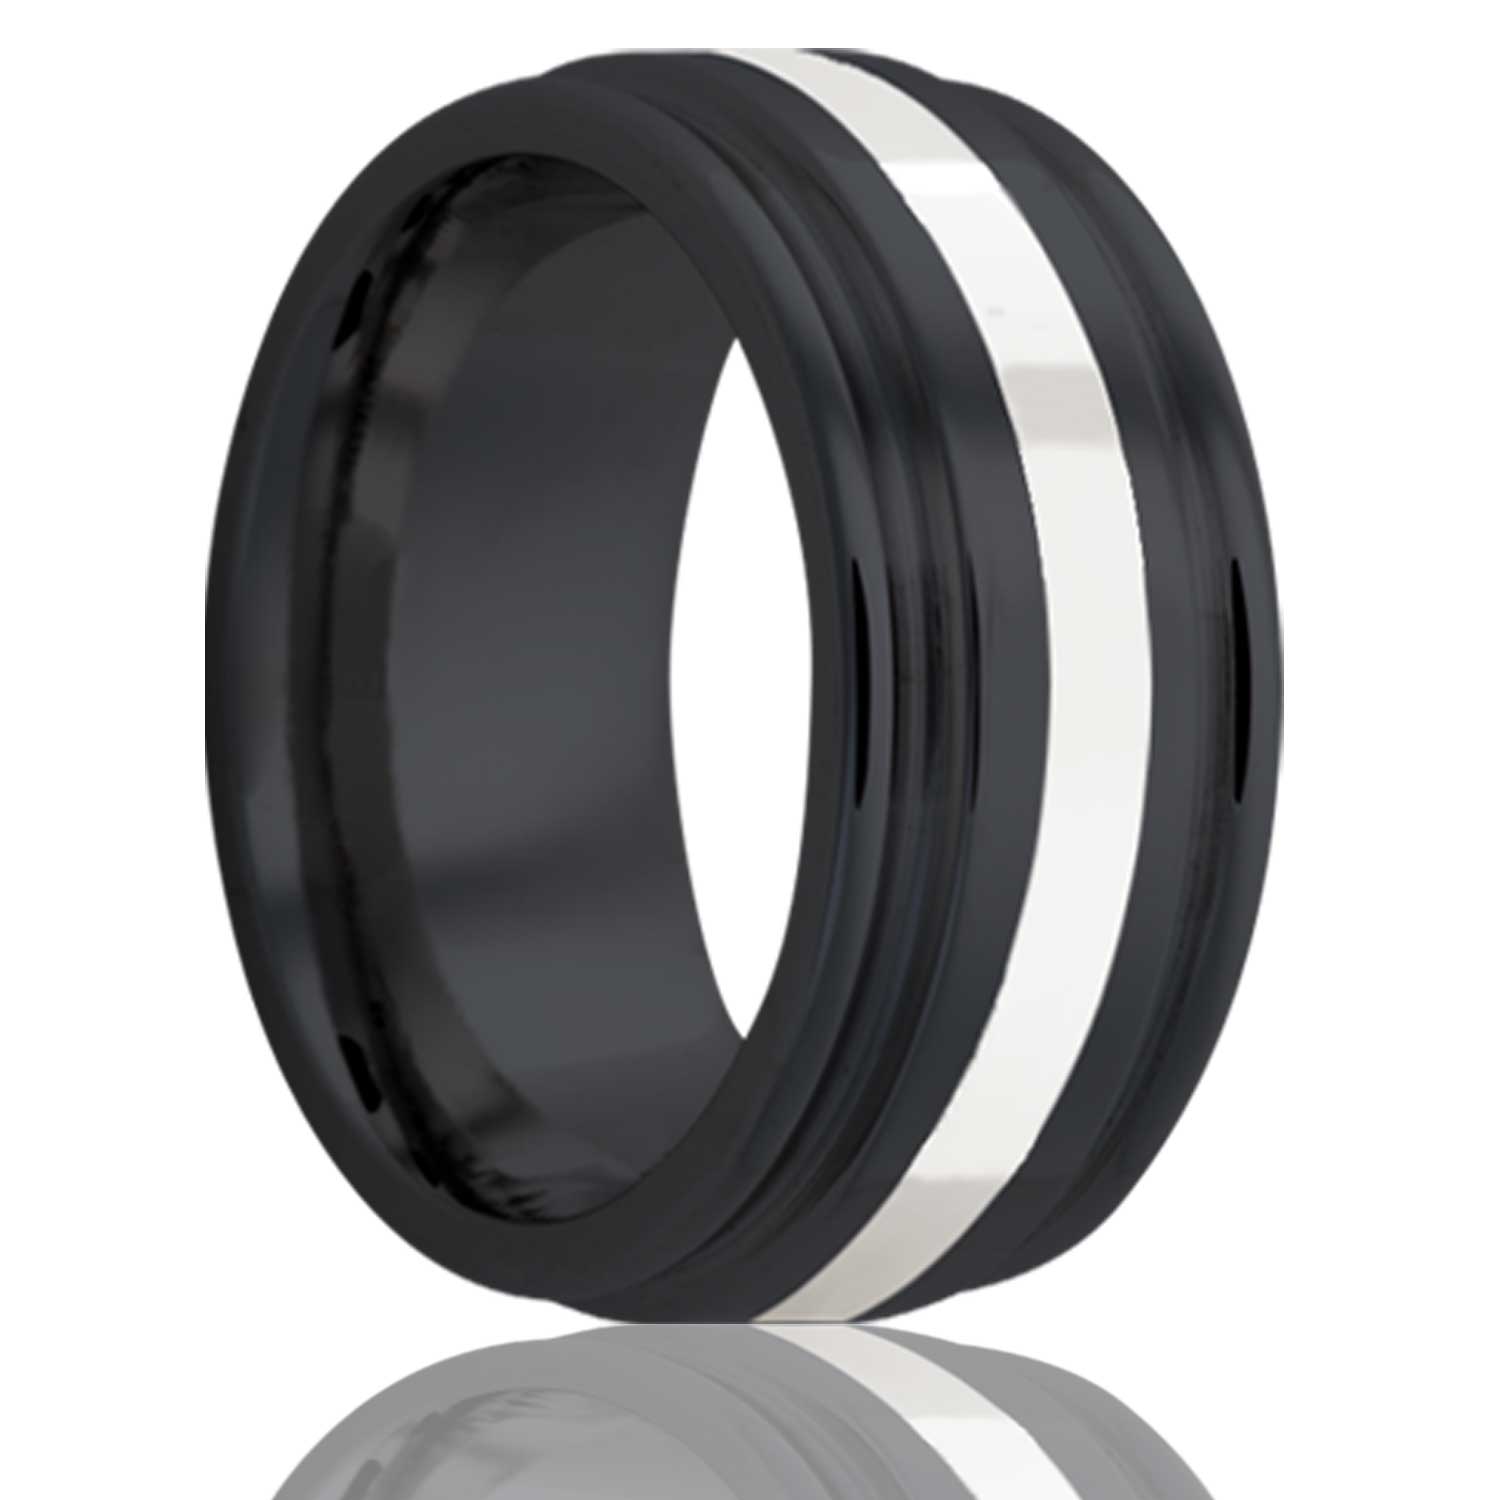 A argentium silver inlaid zirconium wedding band with satin finish & grooved edges displayed on a neutral white background.